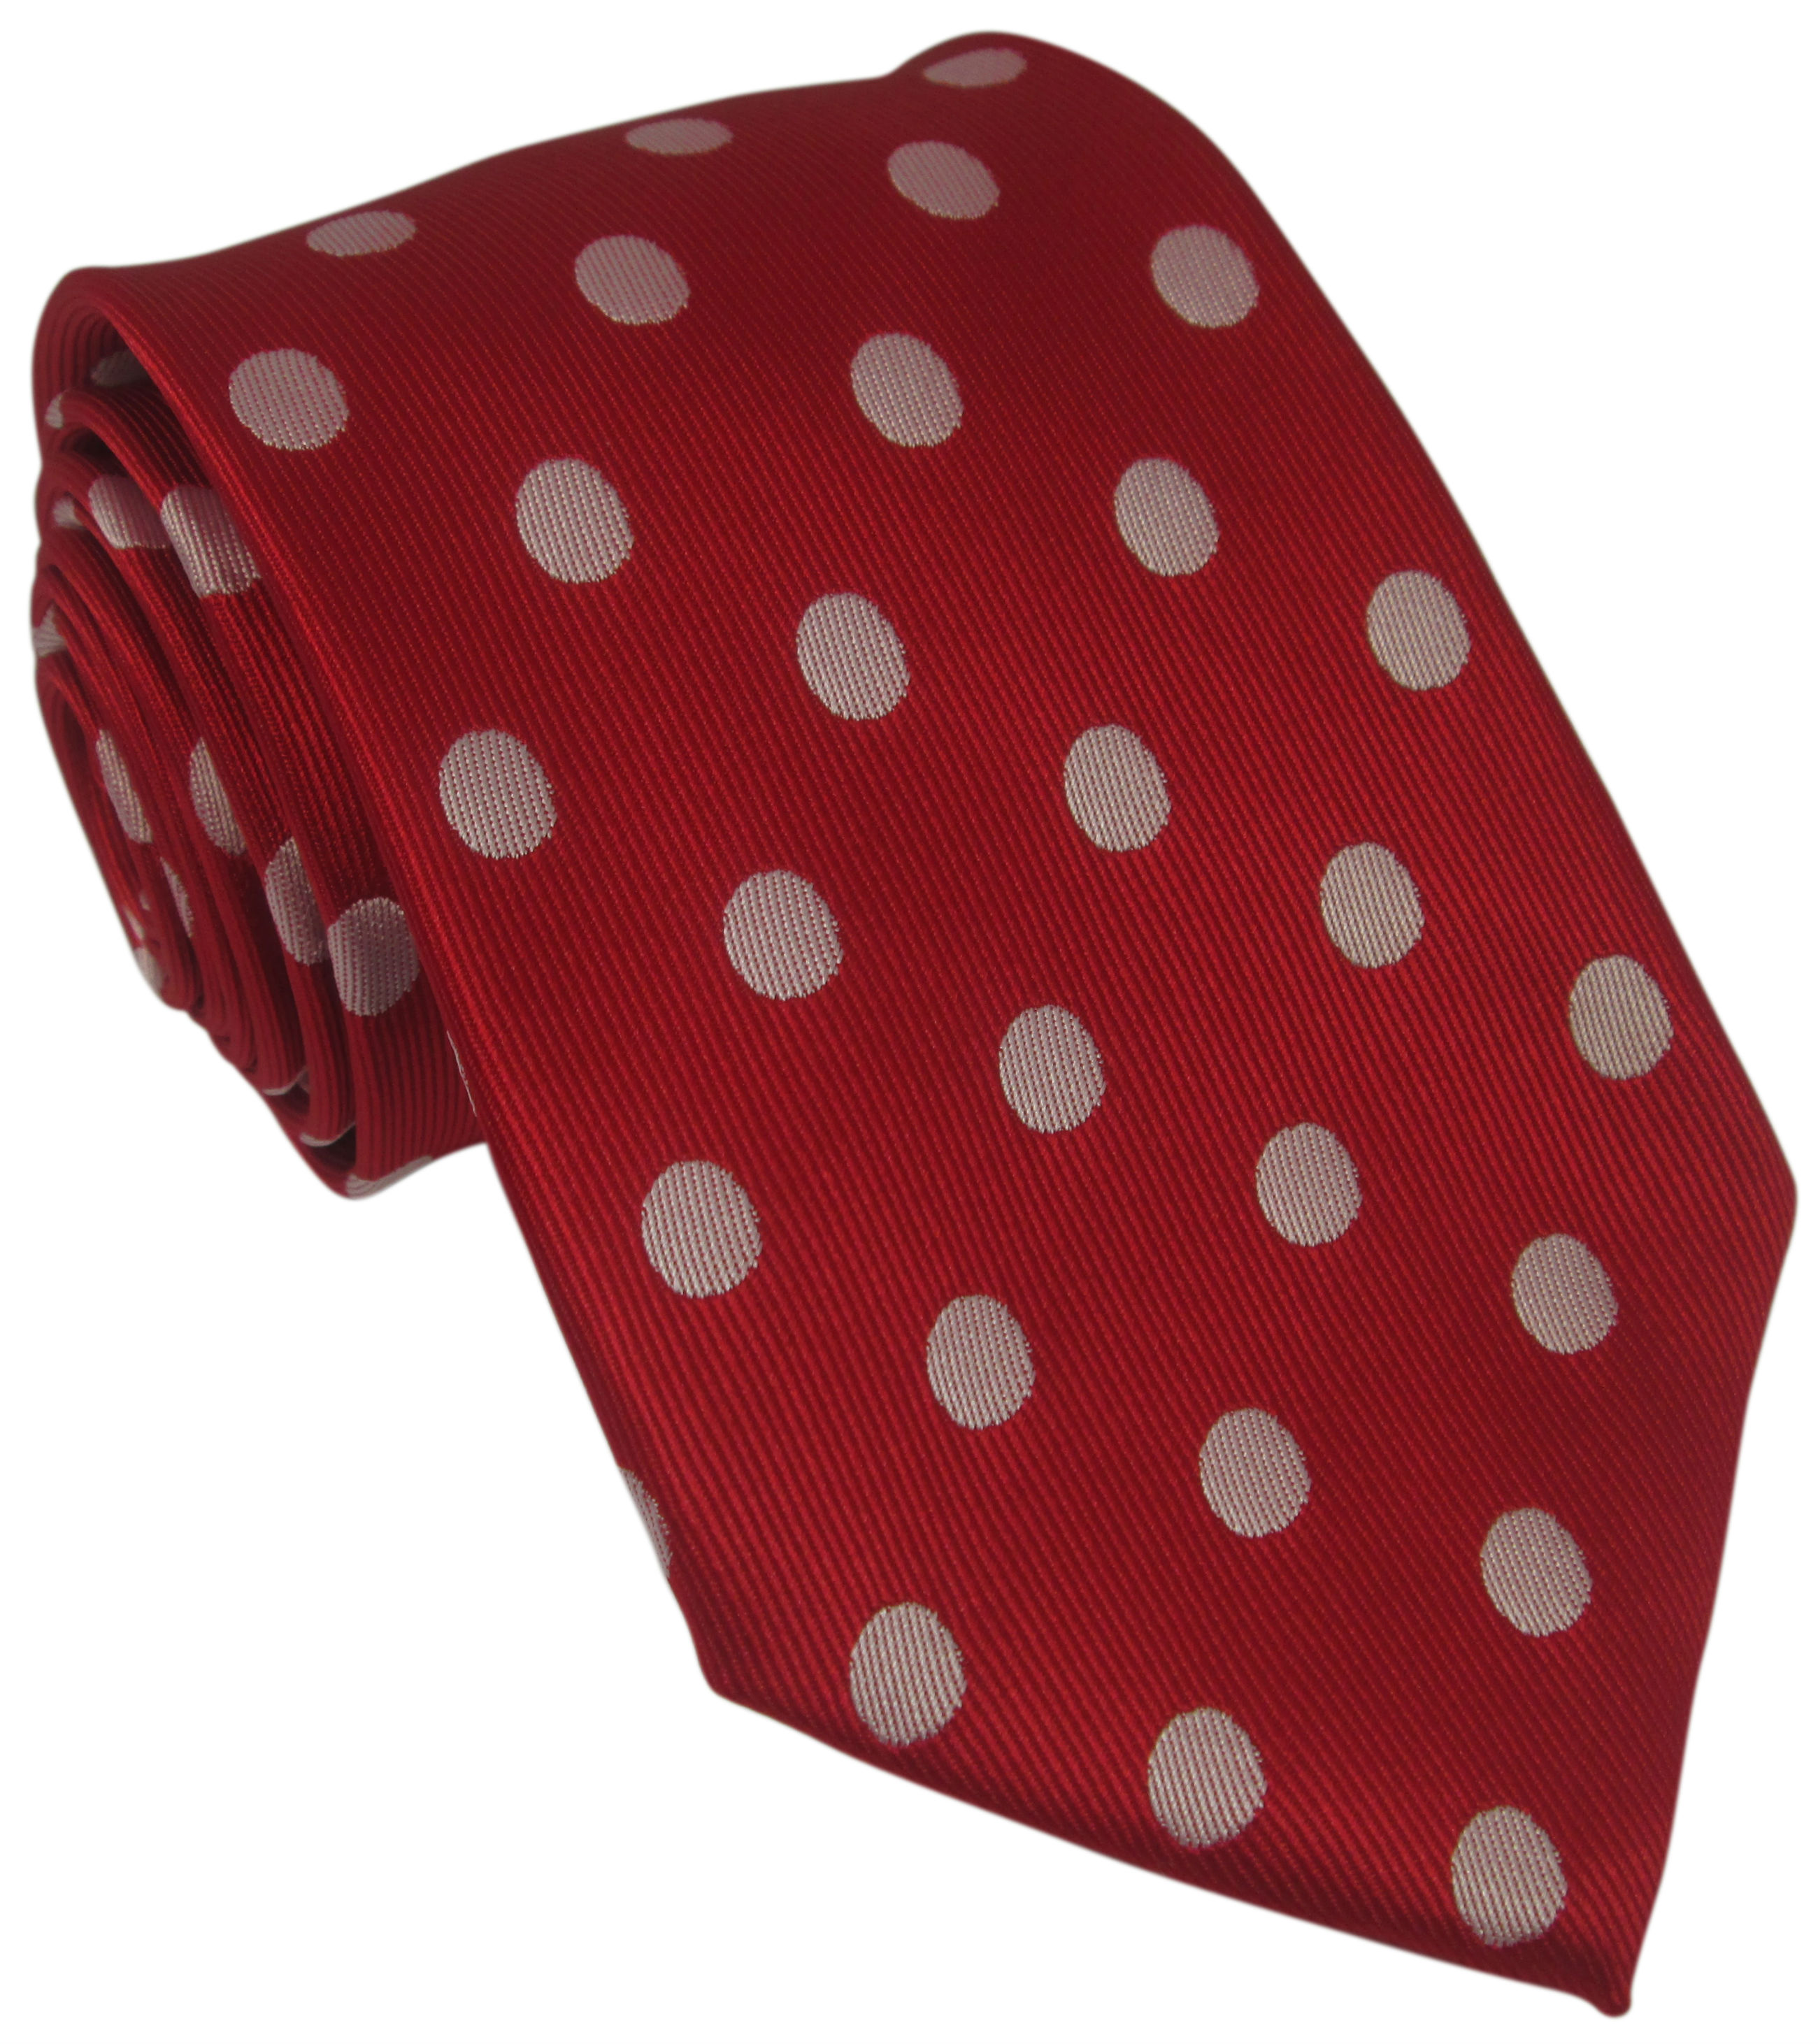 Red Silk Tie with Large White Polka Dot